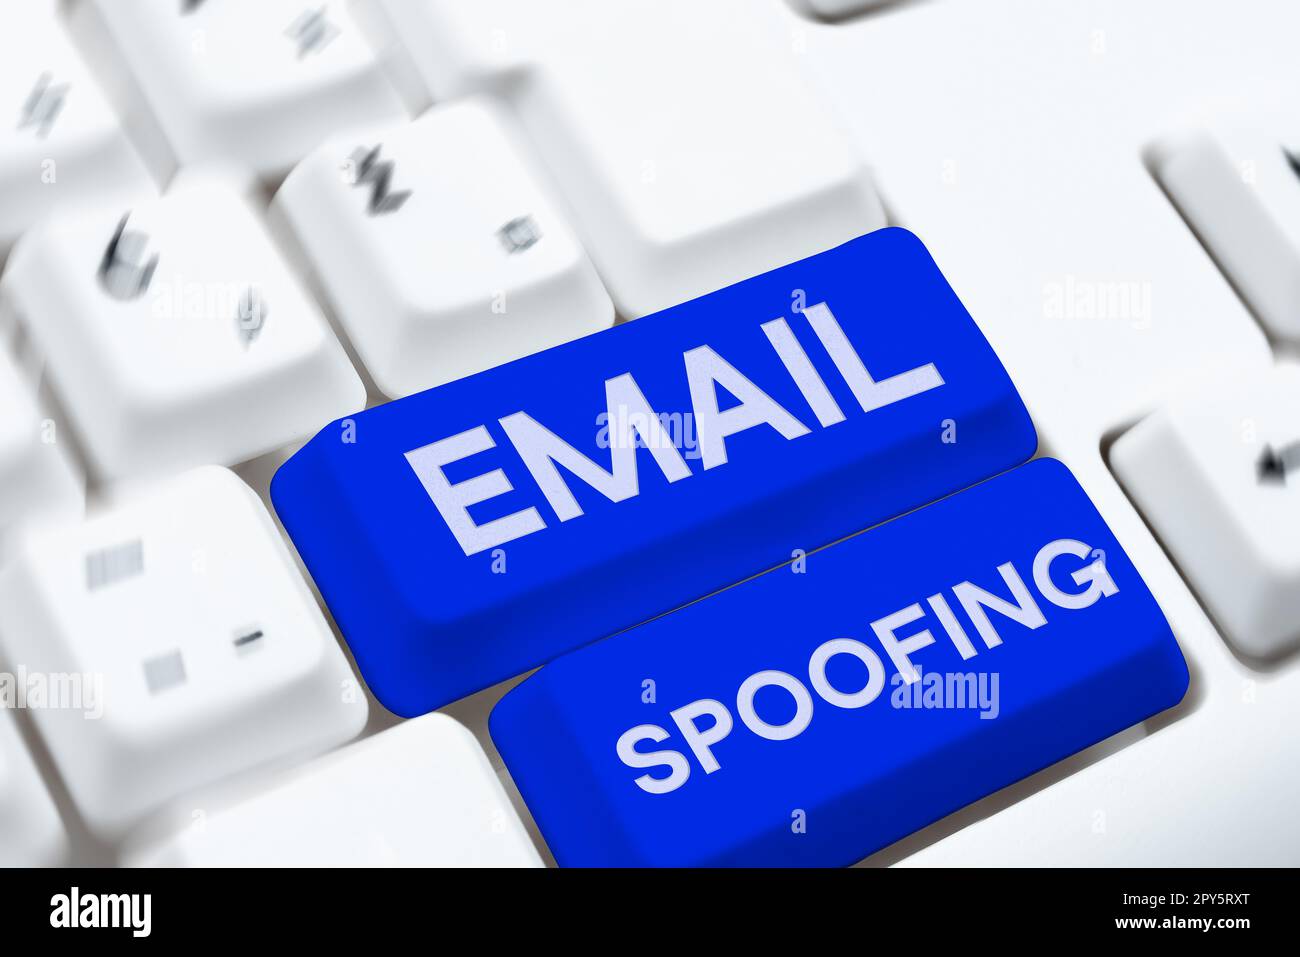 Conceptual caption Email Spoofing. Business idea secure the access and content of an email account or service Stock Photo